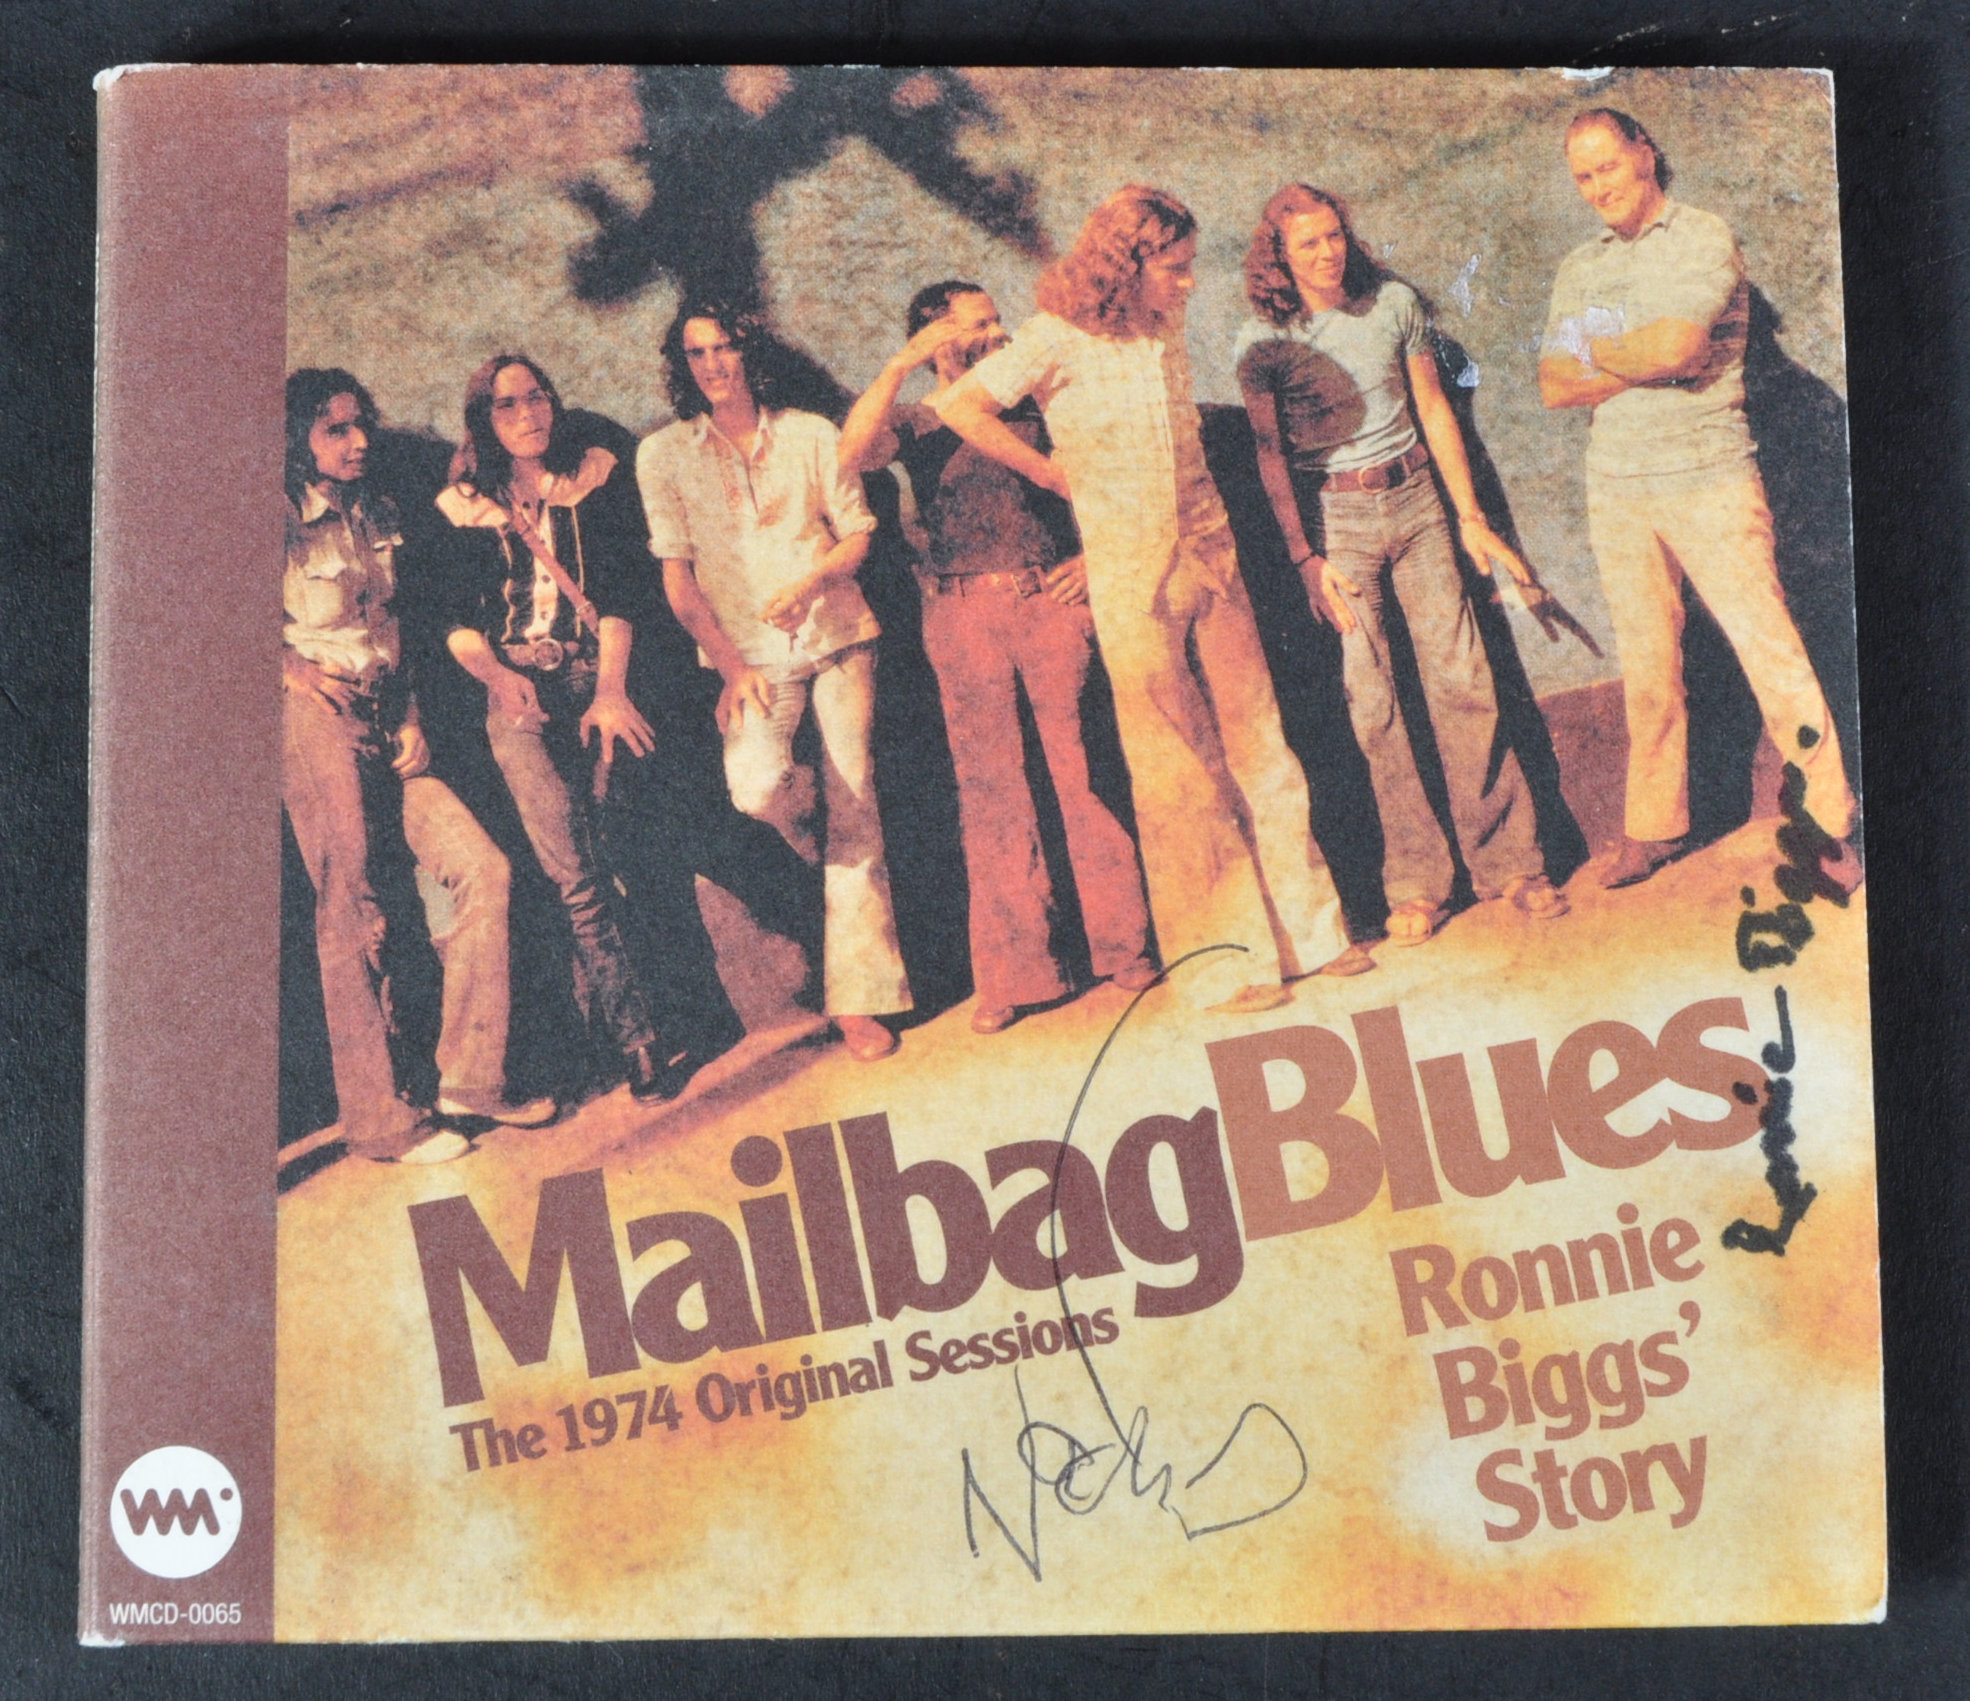 GREAT TRAIN ROBBERY - MAILBAG BLUES TRIPLE SIGNED CD